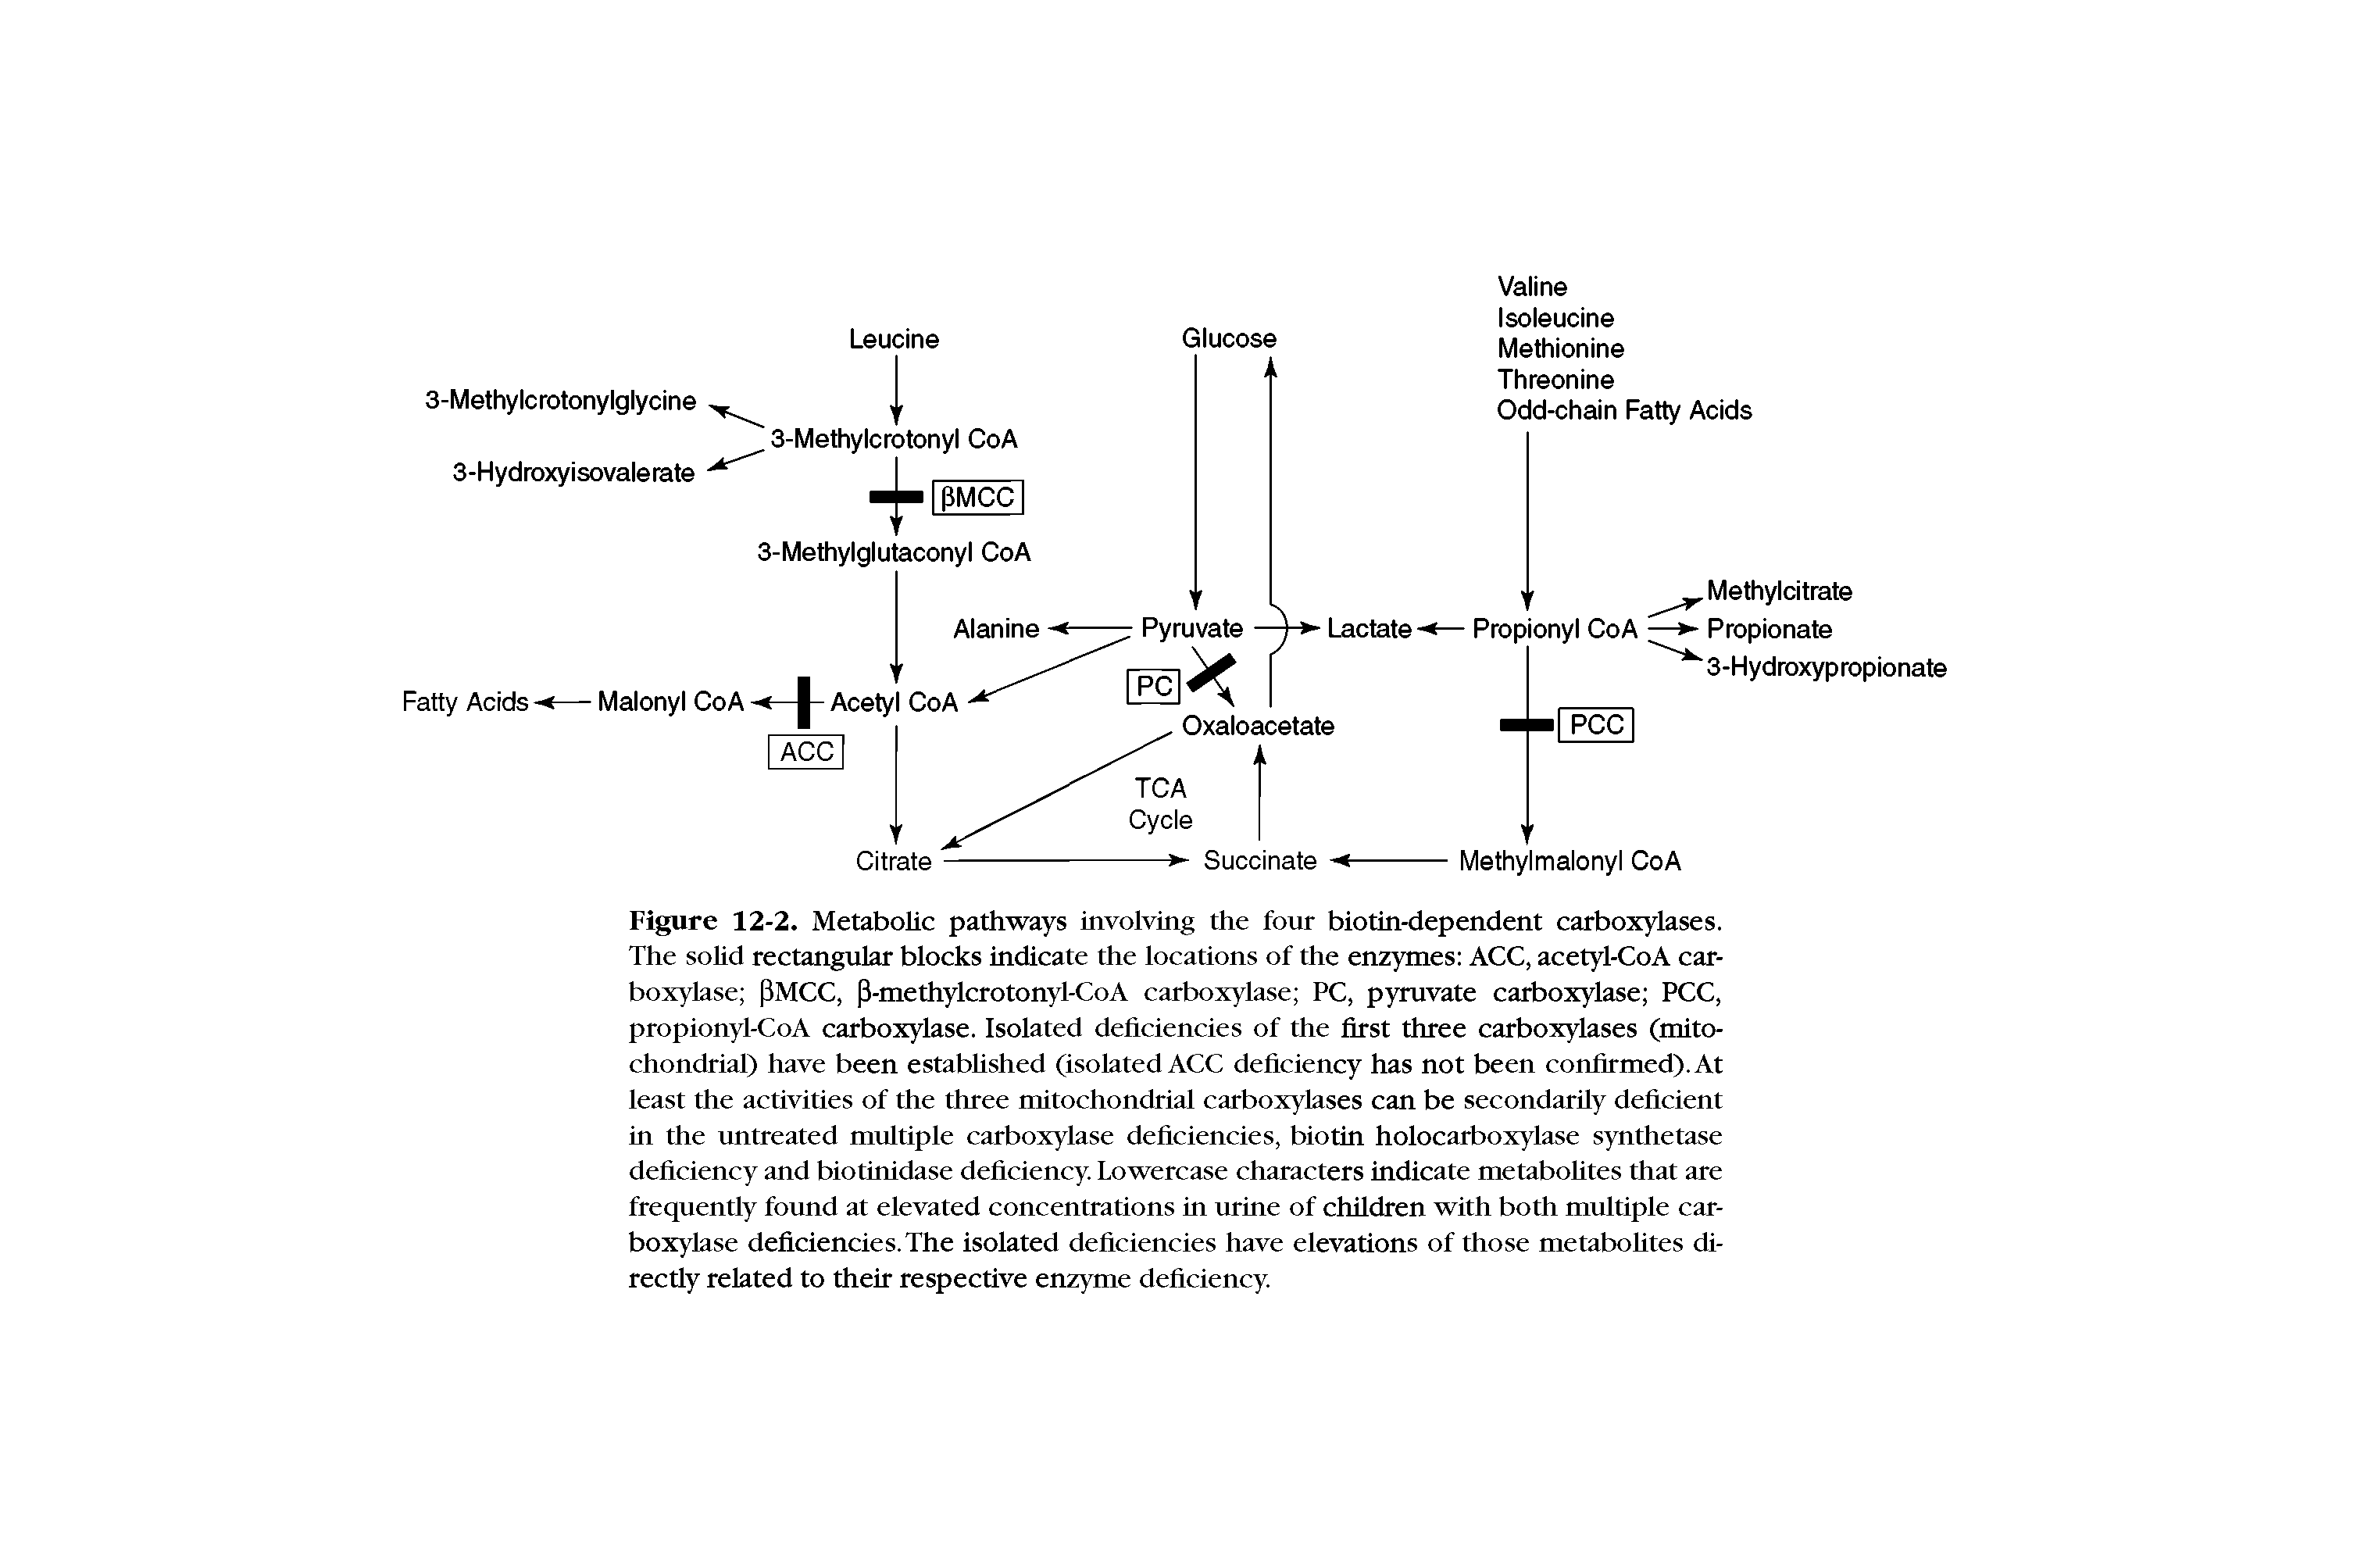 Figure 12-2. Metabolic pathways involving the four biotin-dependent carboxylases. The solid rectangular blocks indicate the locations of the enzymes ACC, acetyl-CoA carboxylase PMCC, P-methylcrotonyl-CoA carboxylase PC, pyruvate carboxylase PCC, propionyl-CoA carboxylase. Isolated deficiencies of the first three carboxylases (mitochondrial) have been established (isolated ACC deficiency has not been confirmed). At least the activities of the three mitochondrial carboxylases can be secondarily deficient in the untreated multiple carboxylase deficiencies, biotin holocarboxylase synthetase deficiency and biotinidase deficiency. Lowercase characters indicate metabolites that are frequently found at elevated concentrations in urine of children with both multiple carboxylase deficiencies. The isolated deficiencies have elevations of those metabolites directly related to their respective enzyme deficiency.